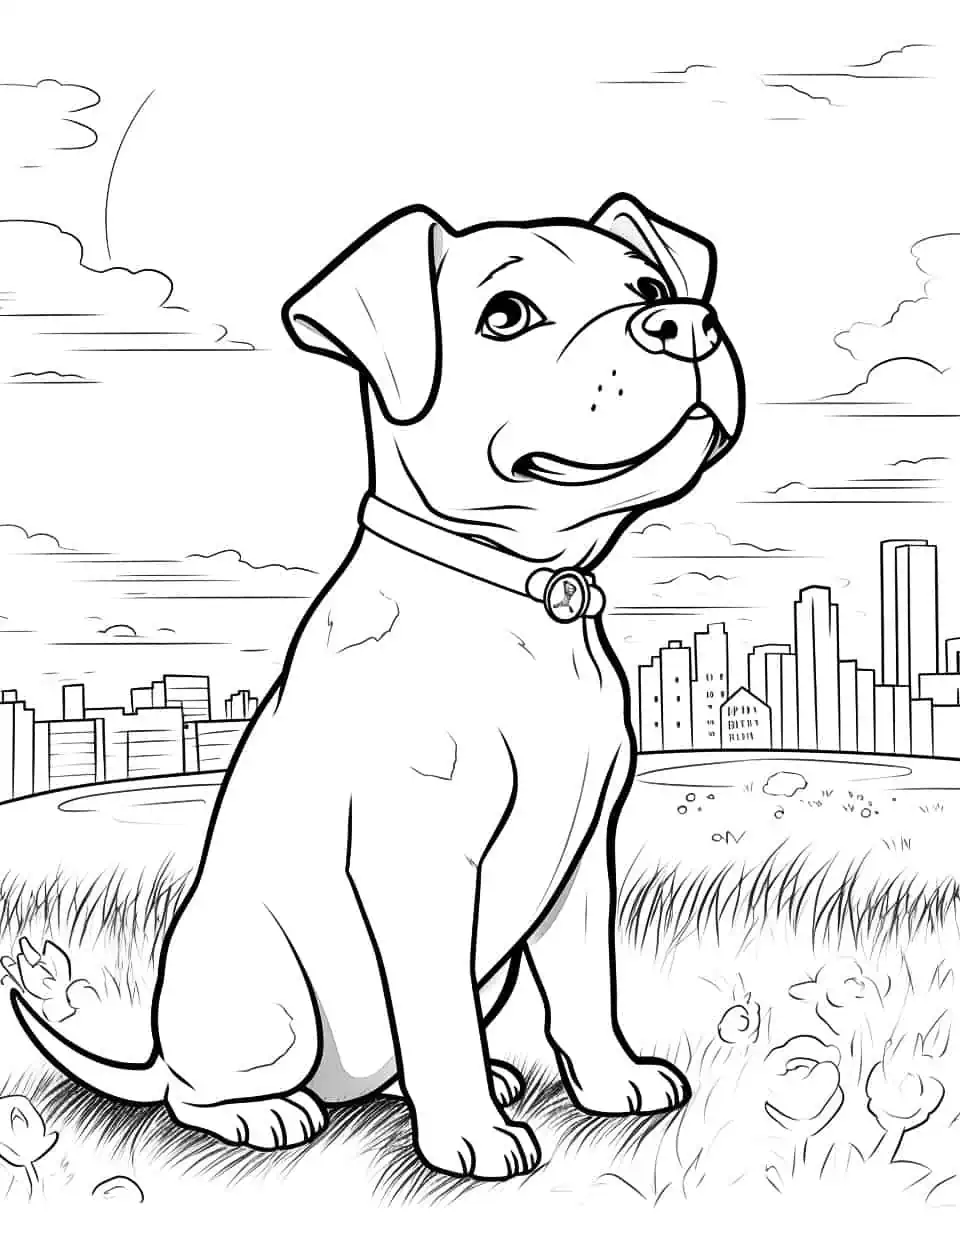 Pitbull and the Sunset Coloring Page - A Pitbull sitting peacefully and watching the sunset in a park.